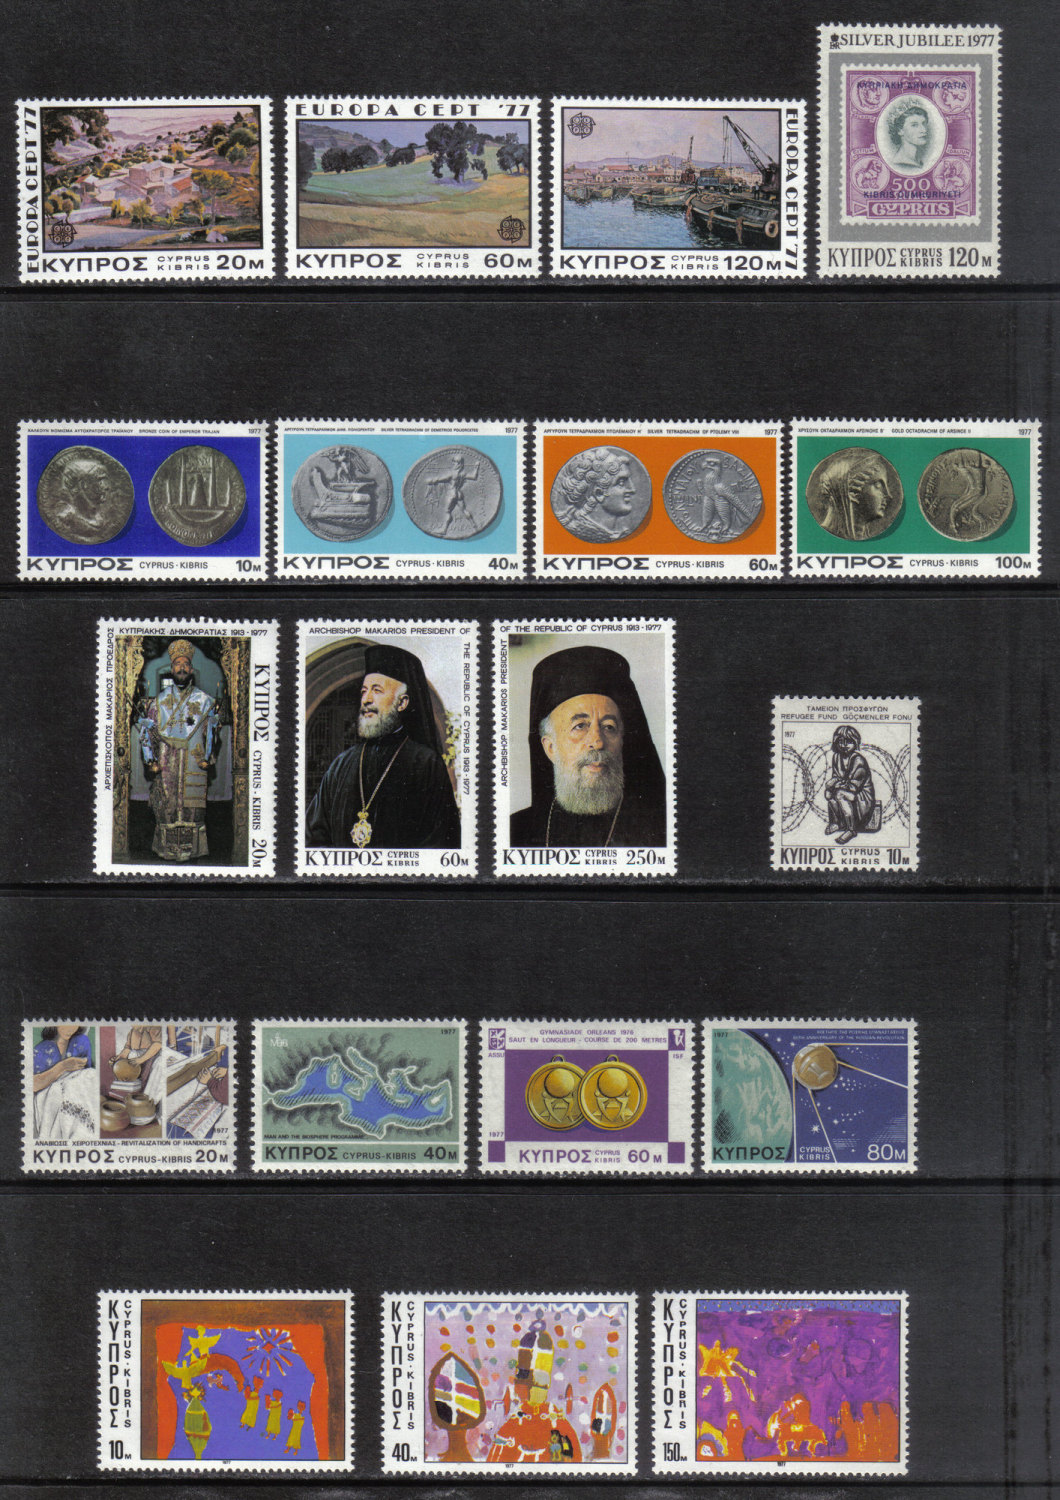 Cyprus Stamps 1977 Complete Year Set - MINT